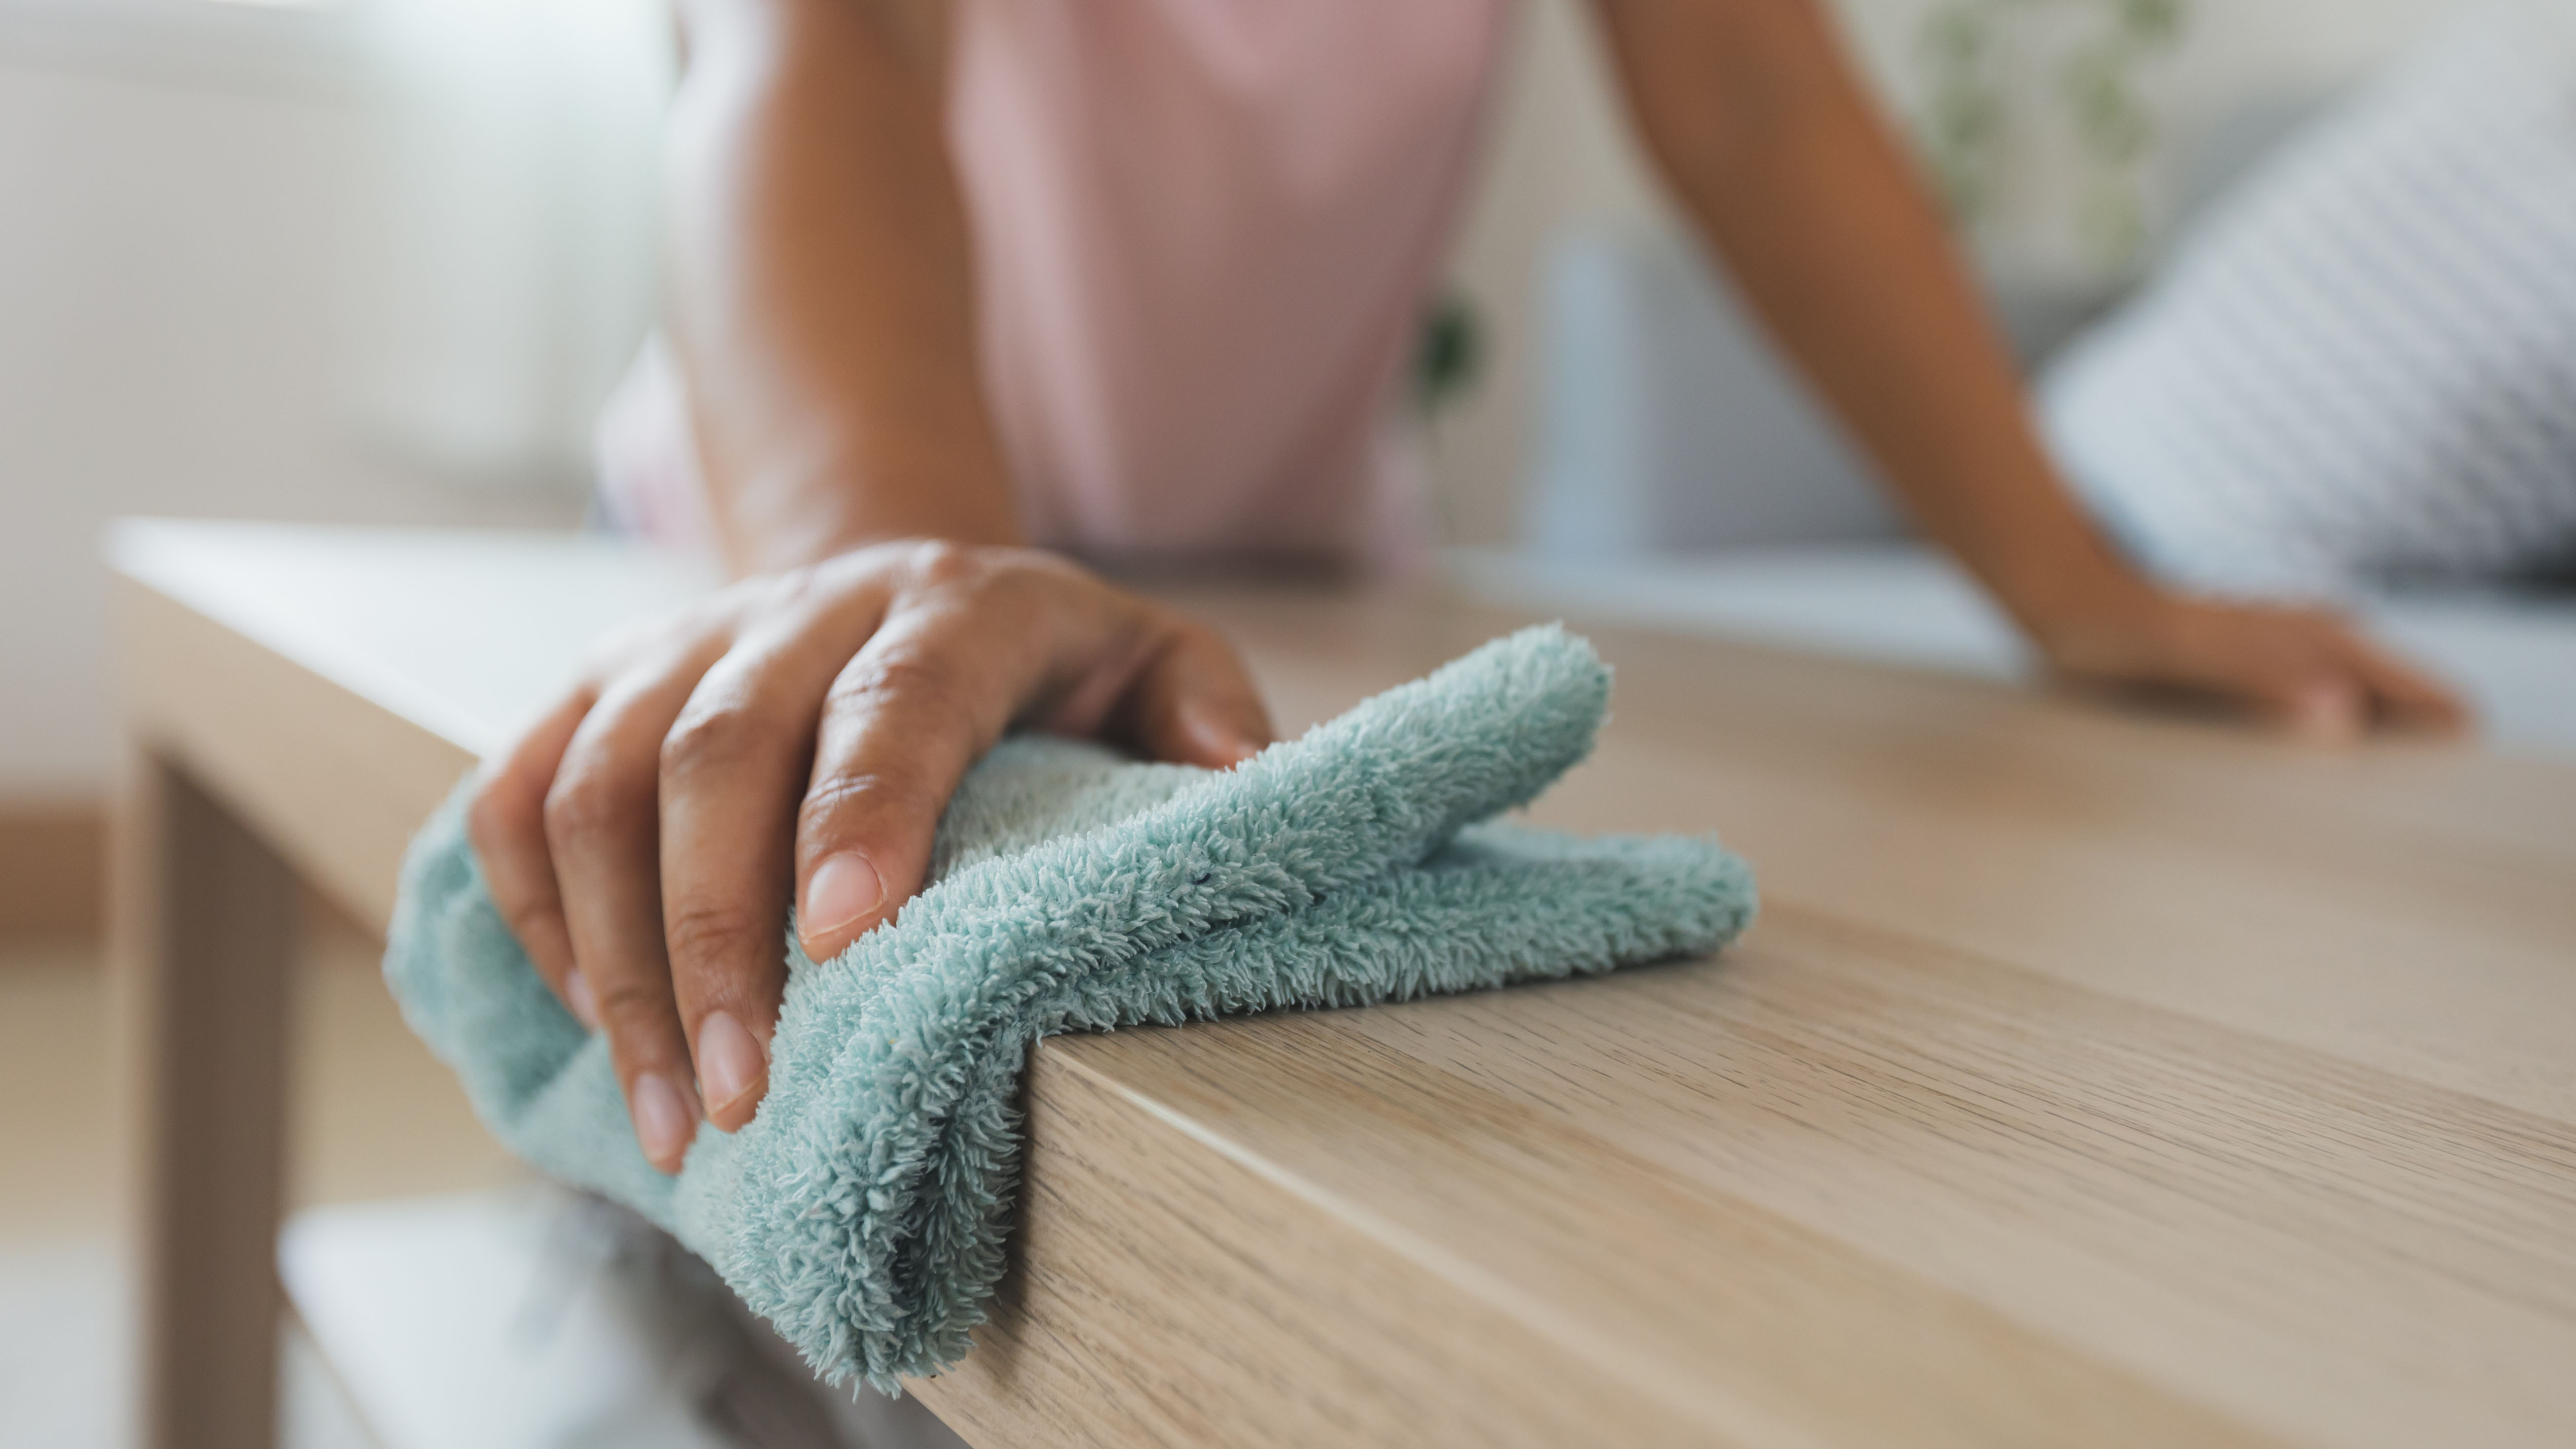 A green microfiber cloth being used to clean wooden surfaces